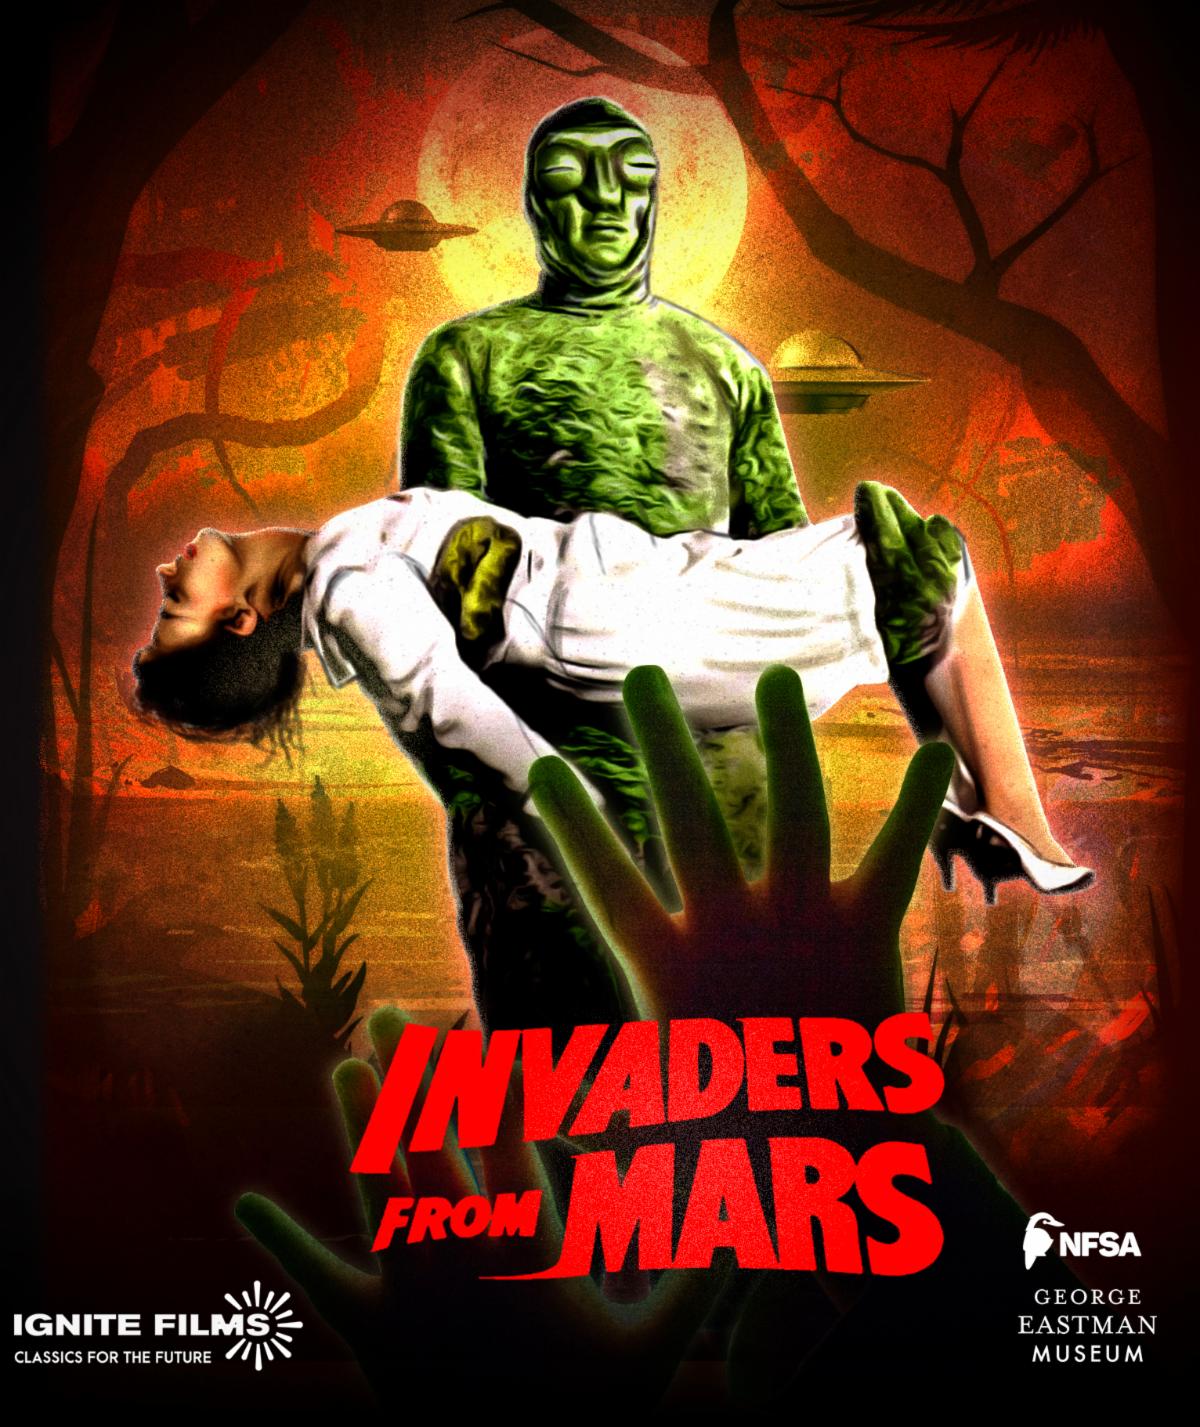 'Invaders From Mars' Scares Up 4K UHD, Blu-ray Restoration on Sept. 26